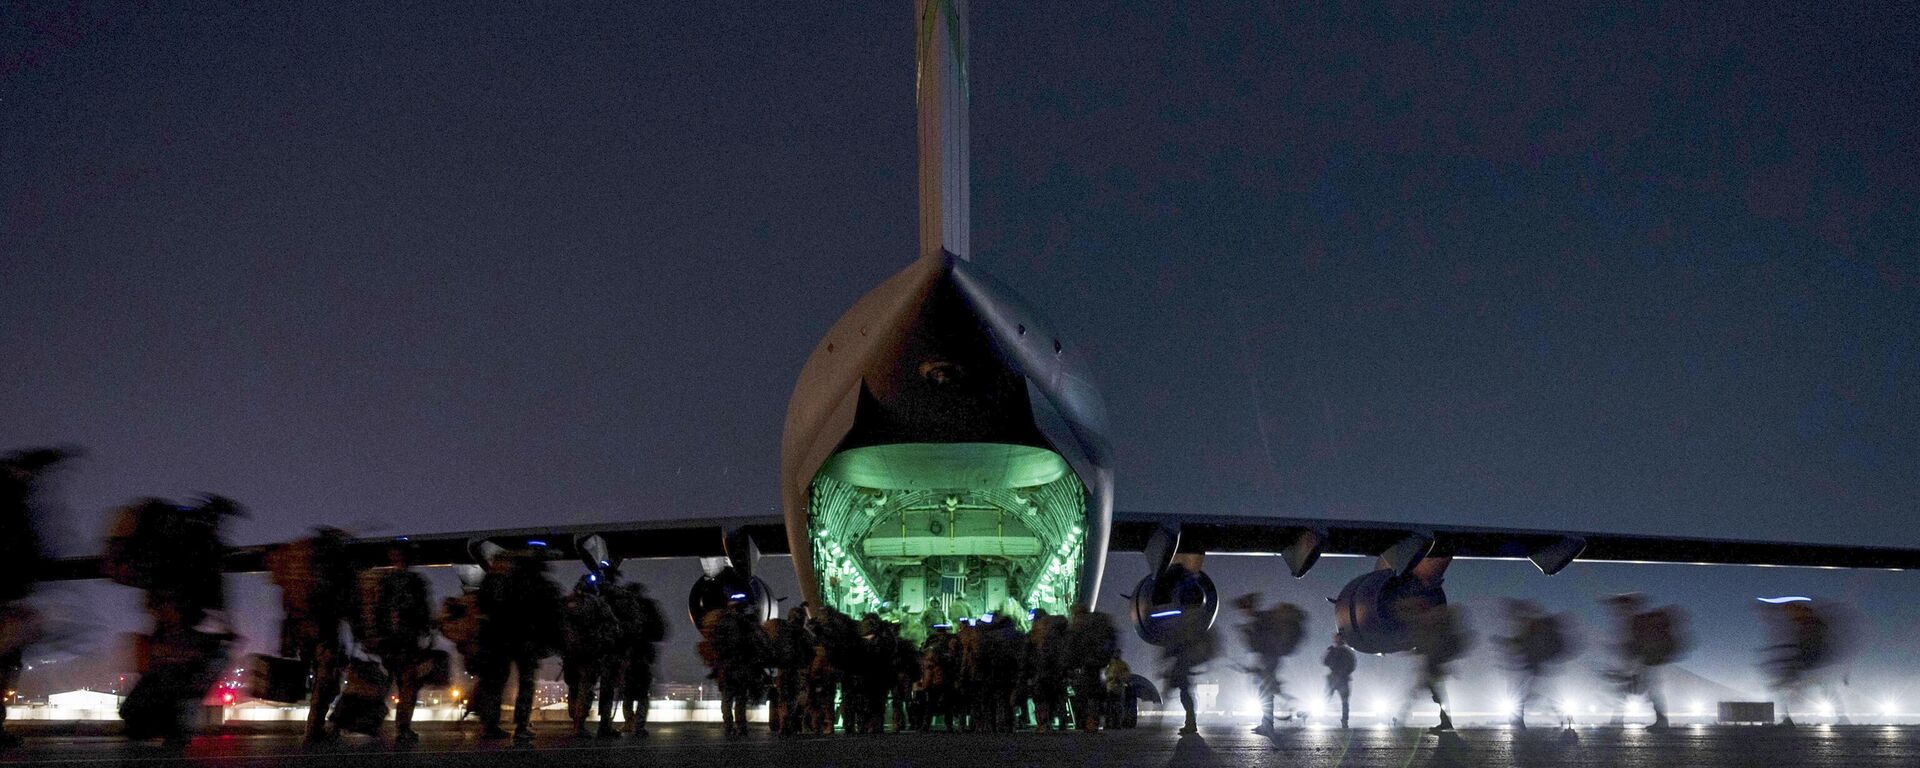 FILE - In this Aug. 30, 2021, file photo provided by the U.S. Air Force, soldiers, assigned to the 82nd Airborne Division, prepare to board a U.S. Air Force C-17 Globemaster III aircraft at Hamid Karzai International Airport in Kabul, Afghanistan. A State Department report says the department failed to do enough contingency planning before the collapse of the U.S.-backed government in Afghanistan. The review repeatedly blames the administration of former President Donald Trump for not doing enough planning or processing of visas after beginning the withdrawal.  - Sputnik India, 1920, 09.10.2023